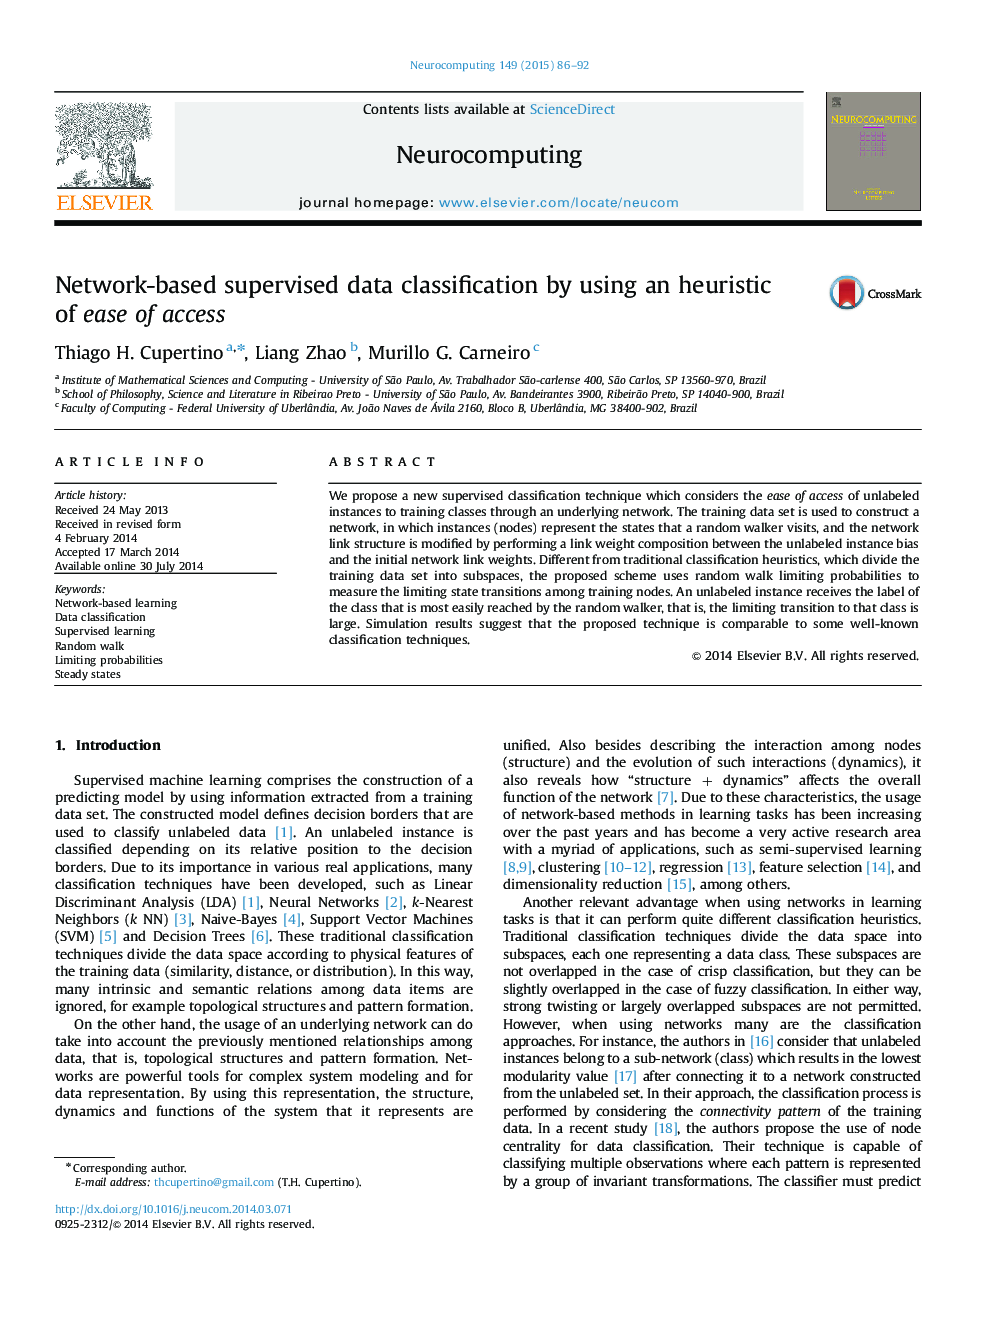 Network-based supervised data classification by using an heuristic of ease of access